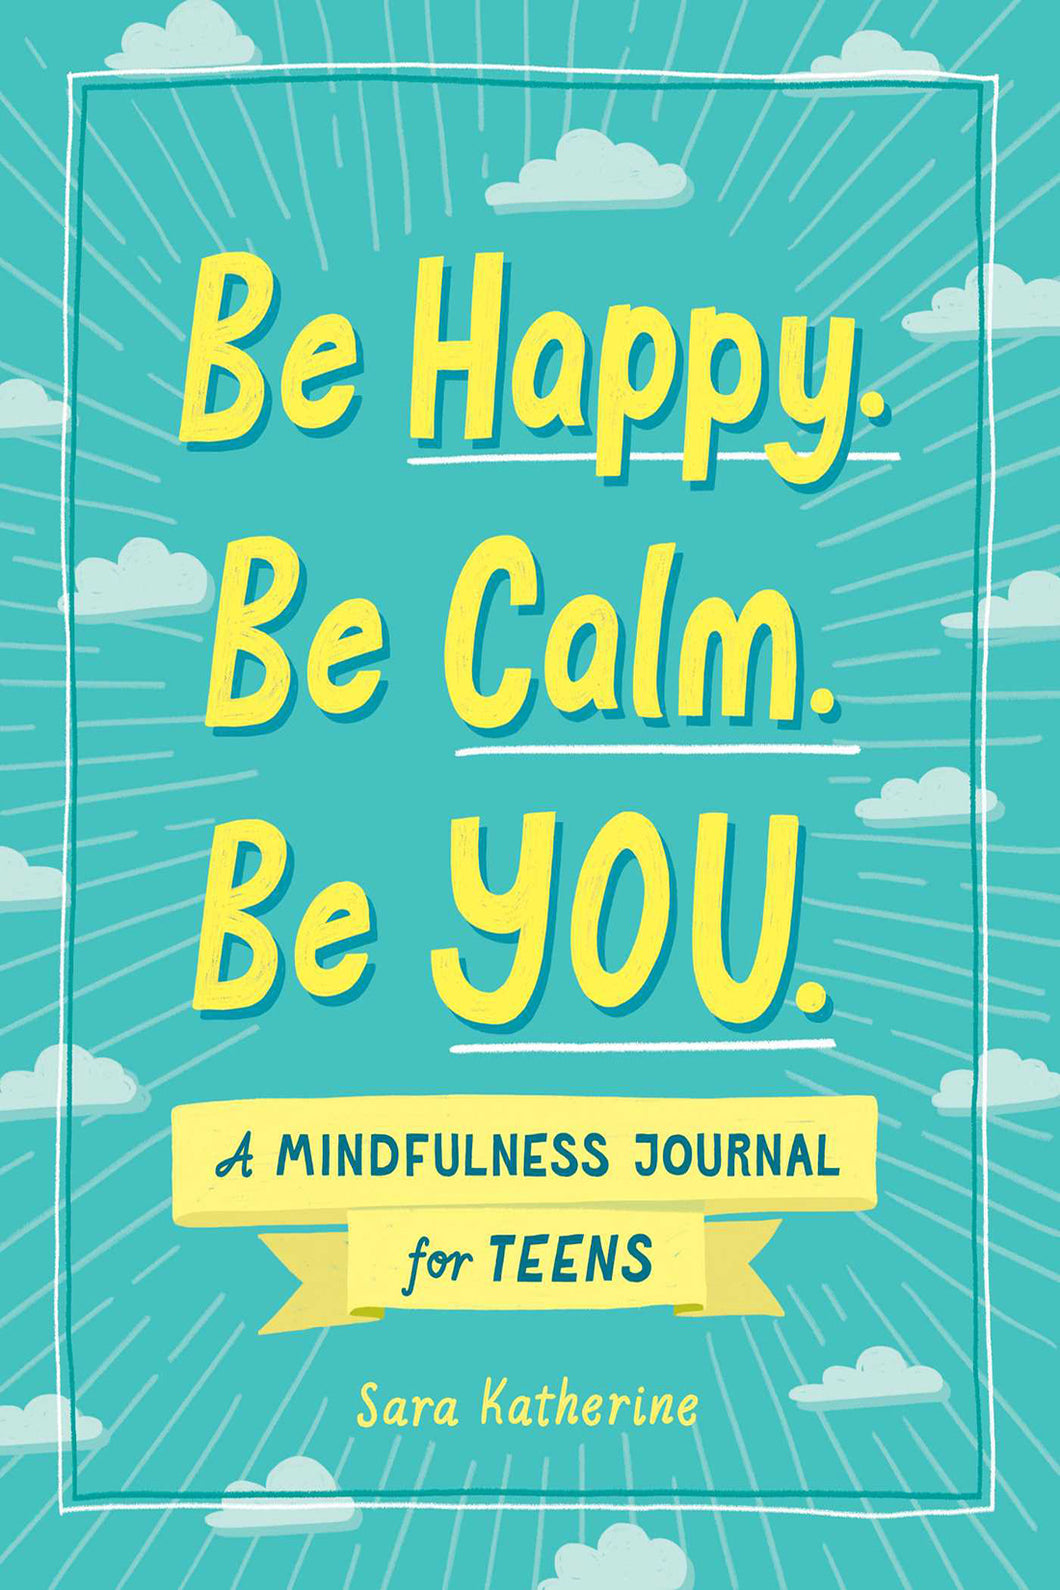 Mindfulness Journal for Teens - Be Happy. Be Calm. Be You. / MICROCOSM